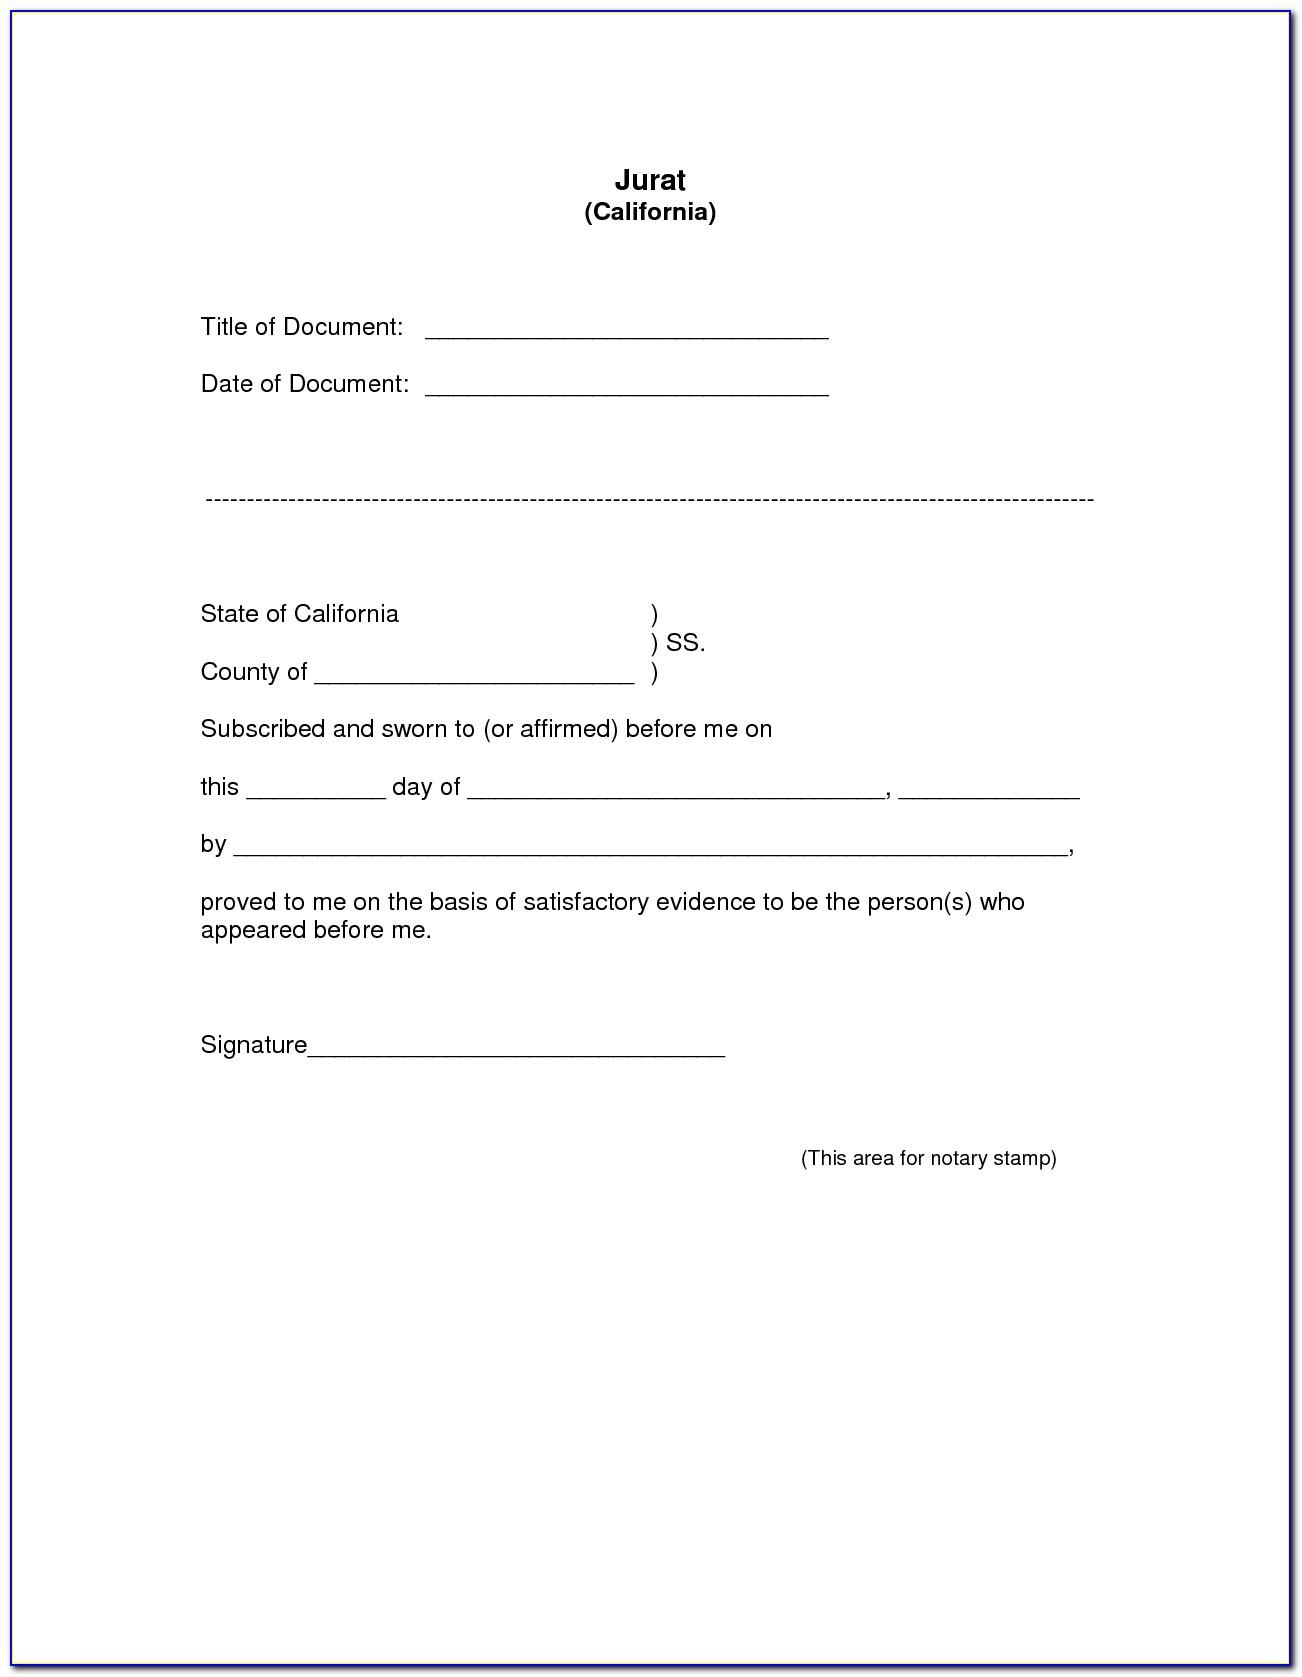 notary statement template